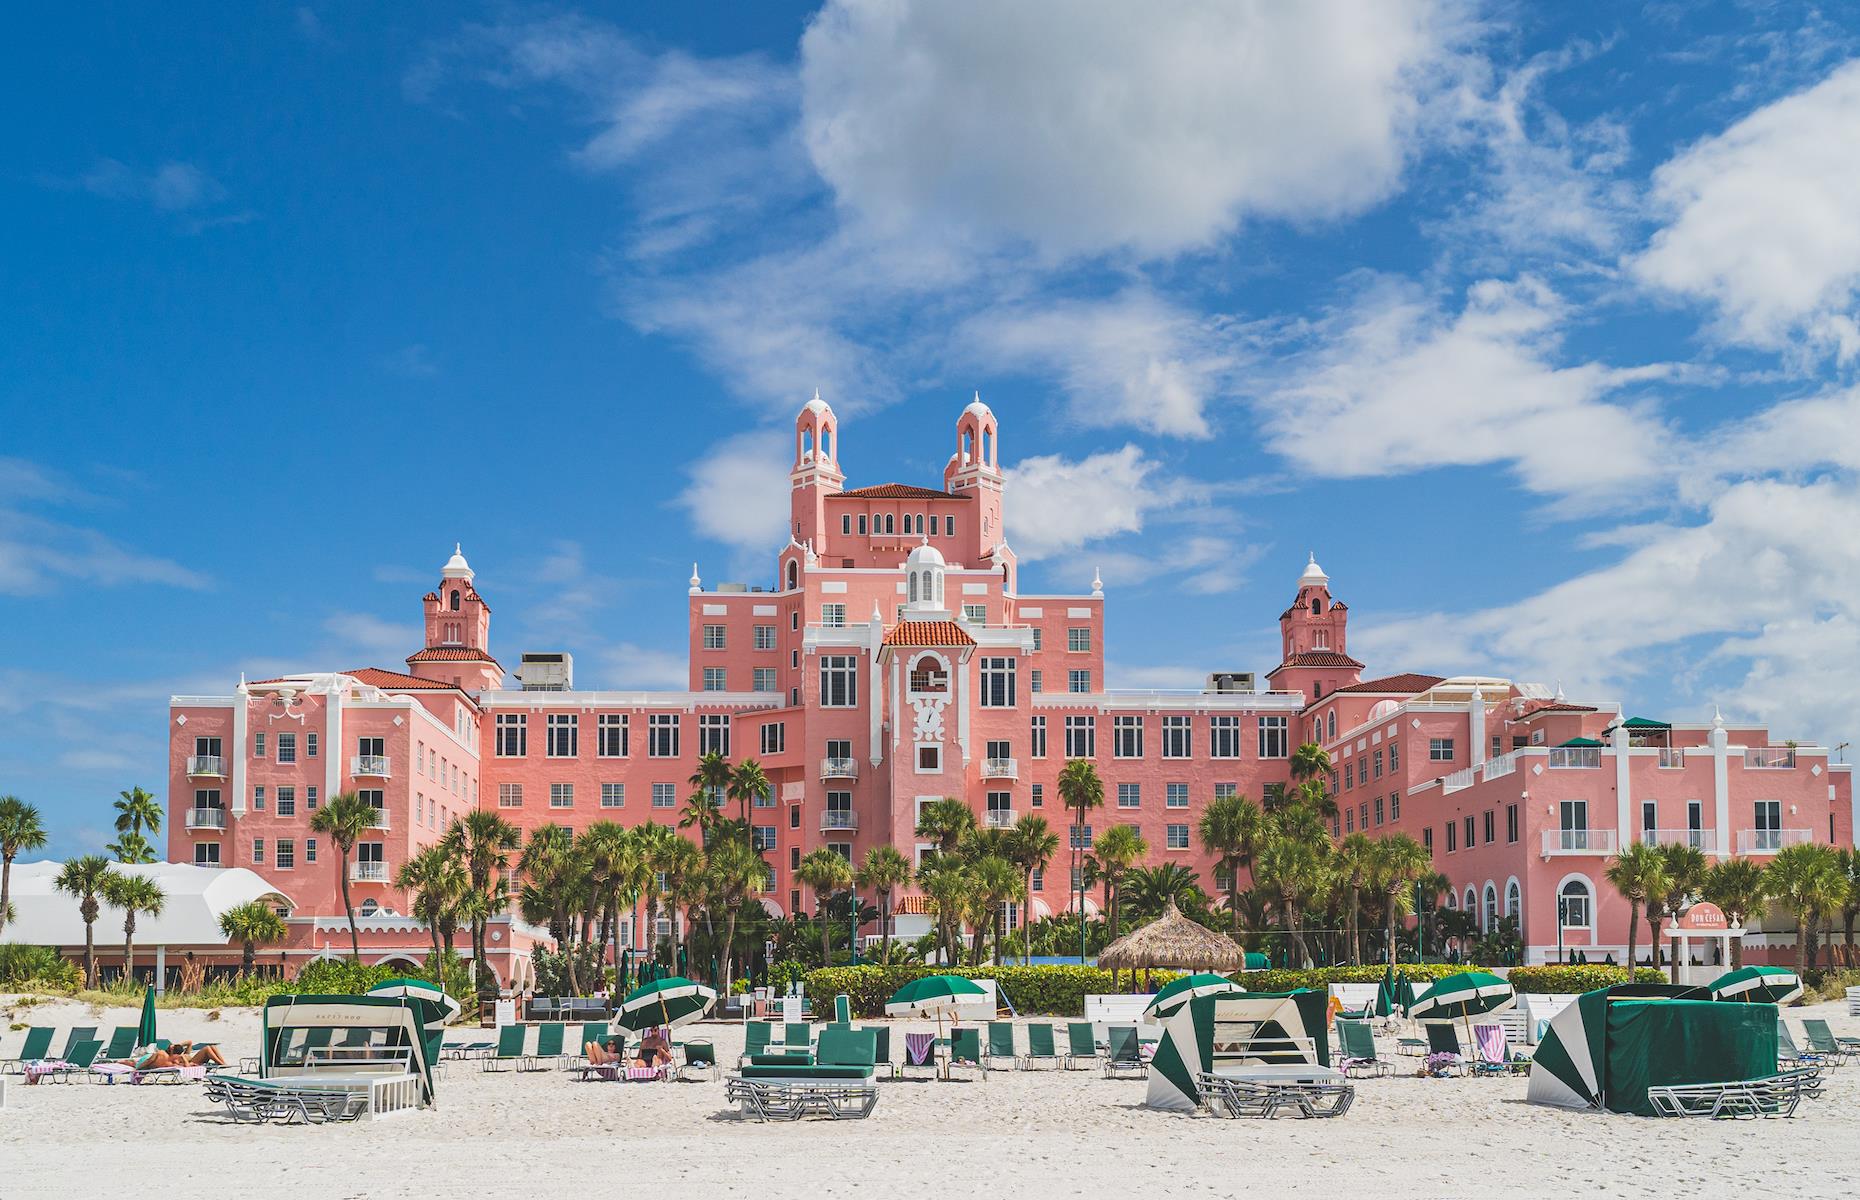 <p>Pink, palatial and with a prime position by the sugar-white sand of St Pete Beach, <a href="https://www.doncesar.com">the Don CeSar</a> opened in 1928. It also played host to man of the moment F. Scott Fitzgerald along with other socialites of the age. Built by architect Henry H Dupont, its flamboyant exterior exhibited Spanish and British colonial influences while extravagant Art Deco features adorned its lobby and ballroom. After being used by the army in World War II, it became office space through to the Sixties when it fell into disrepair. It reopened as a hotel in 1973 and is now listed on the National Register of Historic Places. </p>